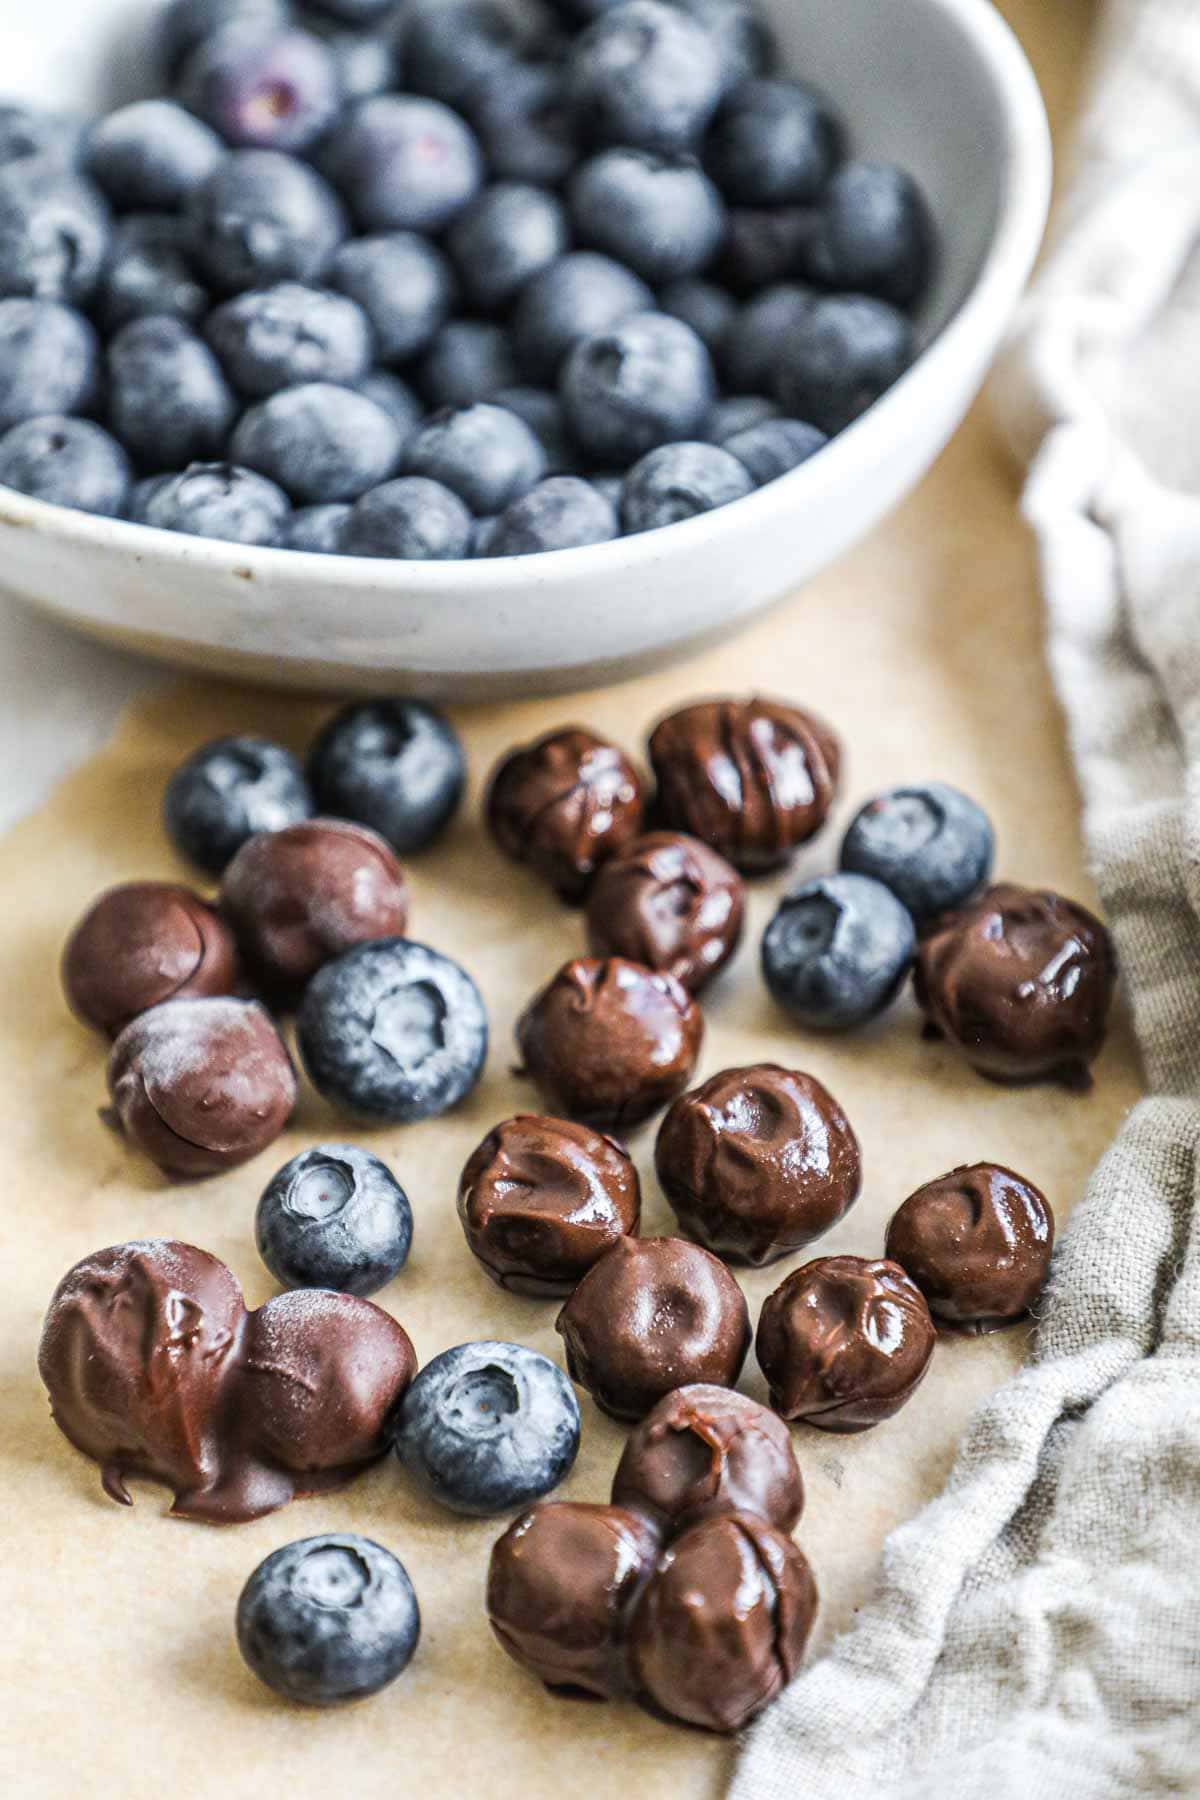 Chocolate covered blueberries